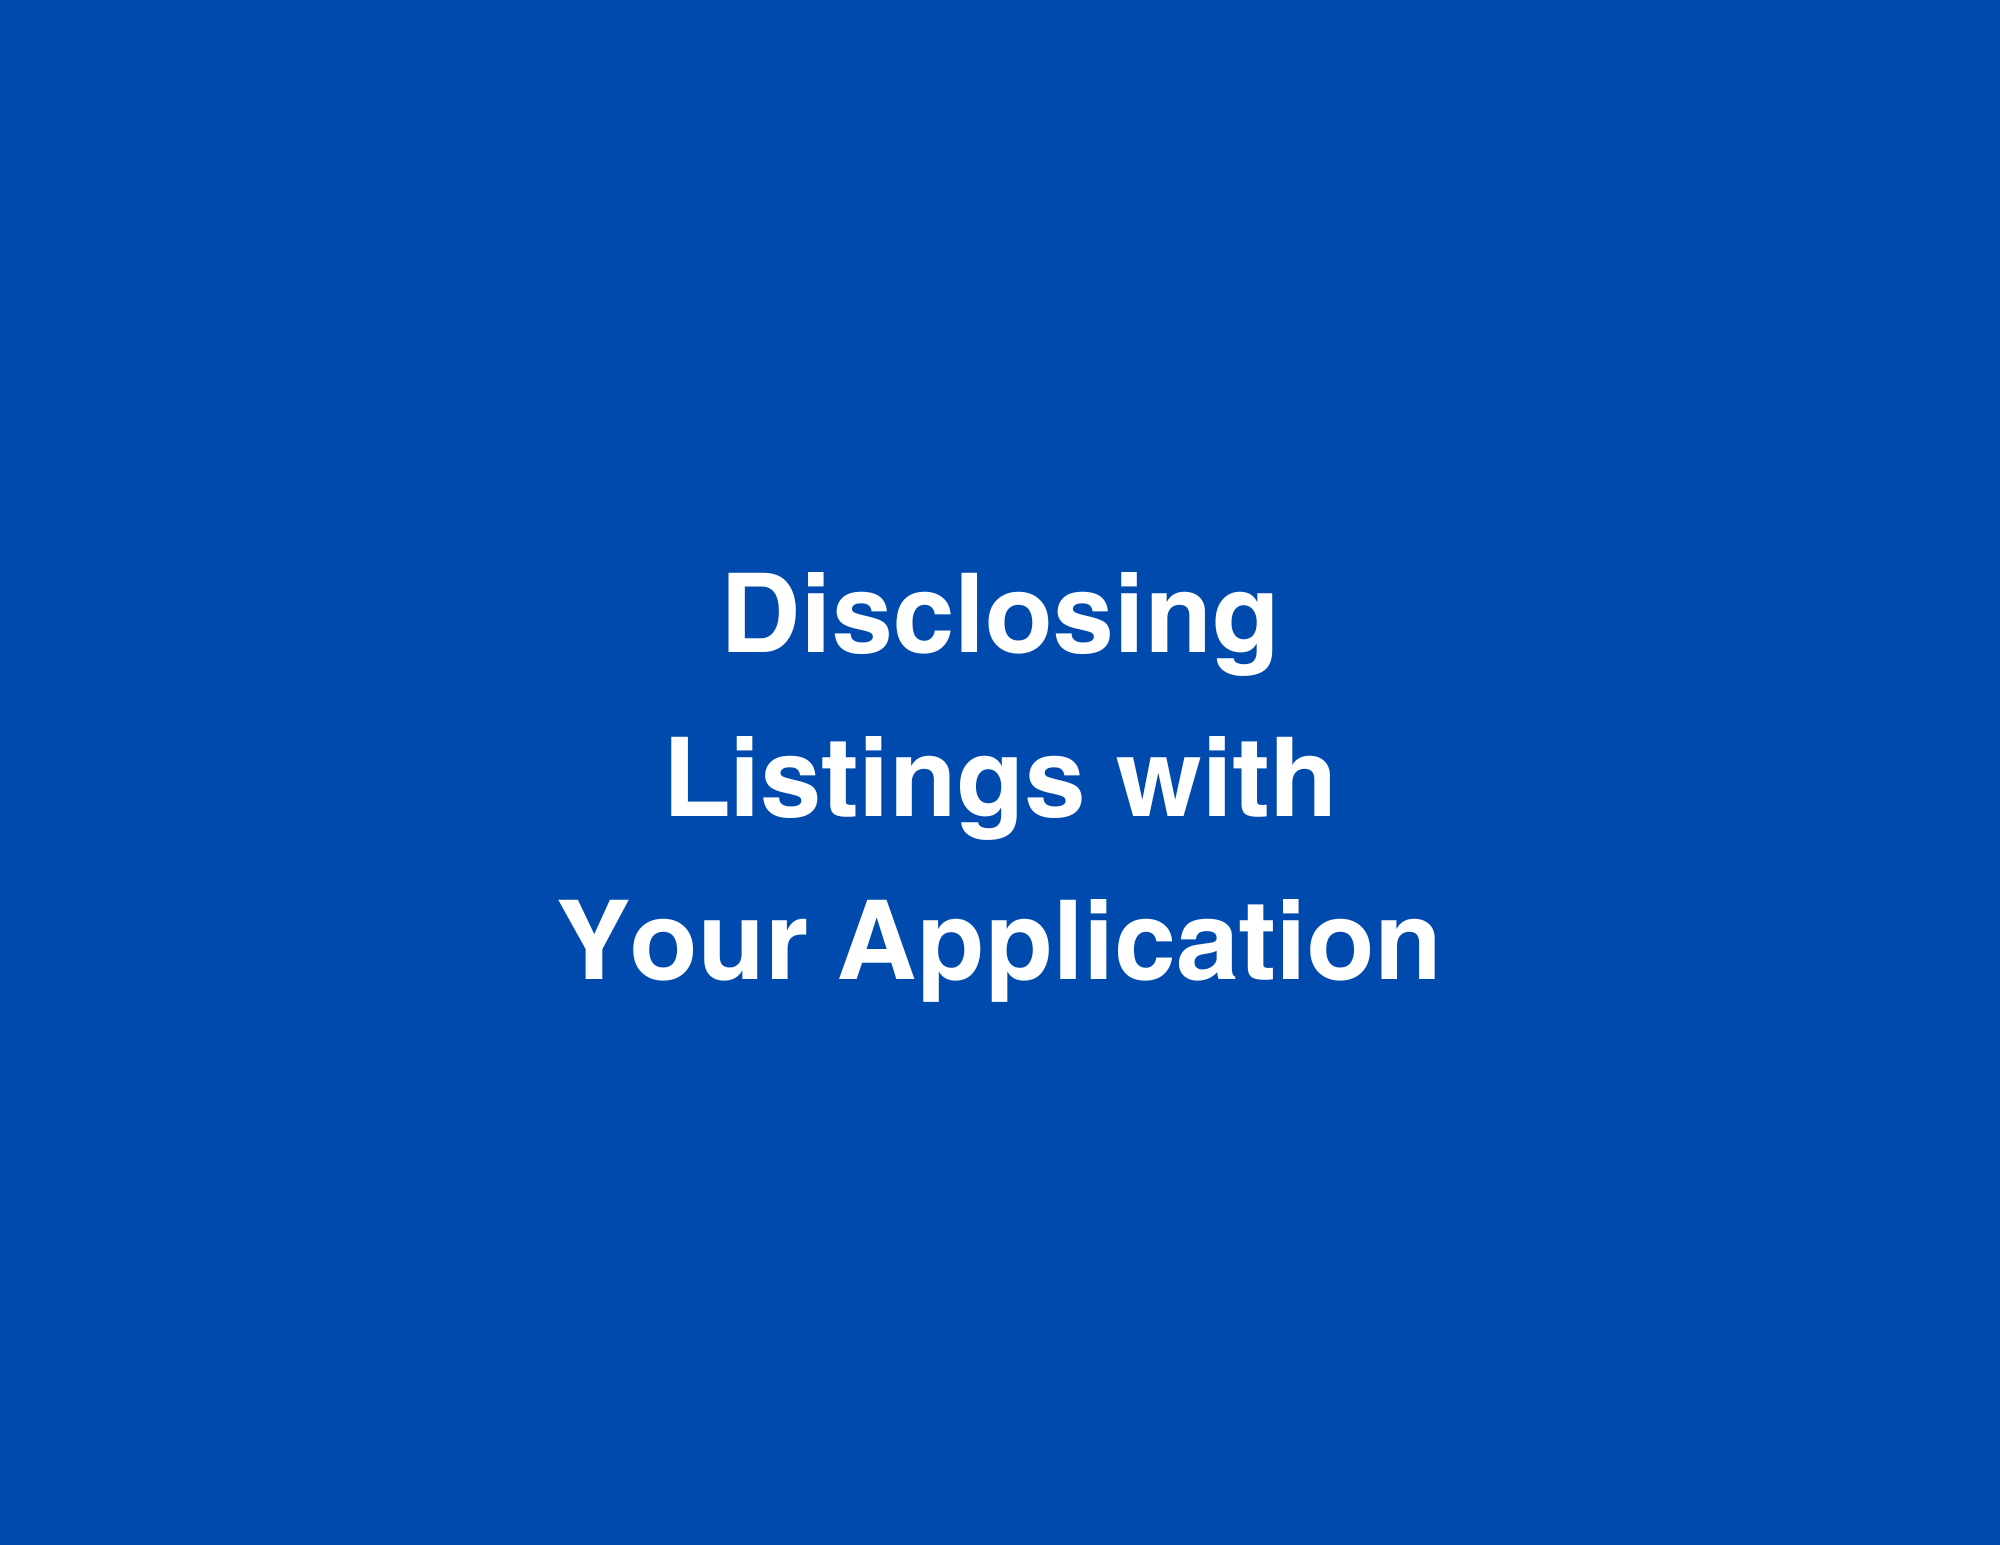 Disclosing Listings with Your Application